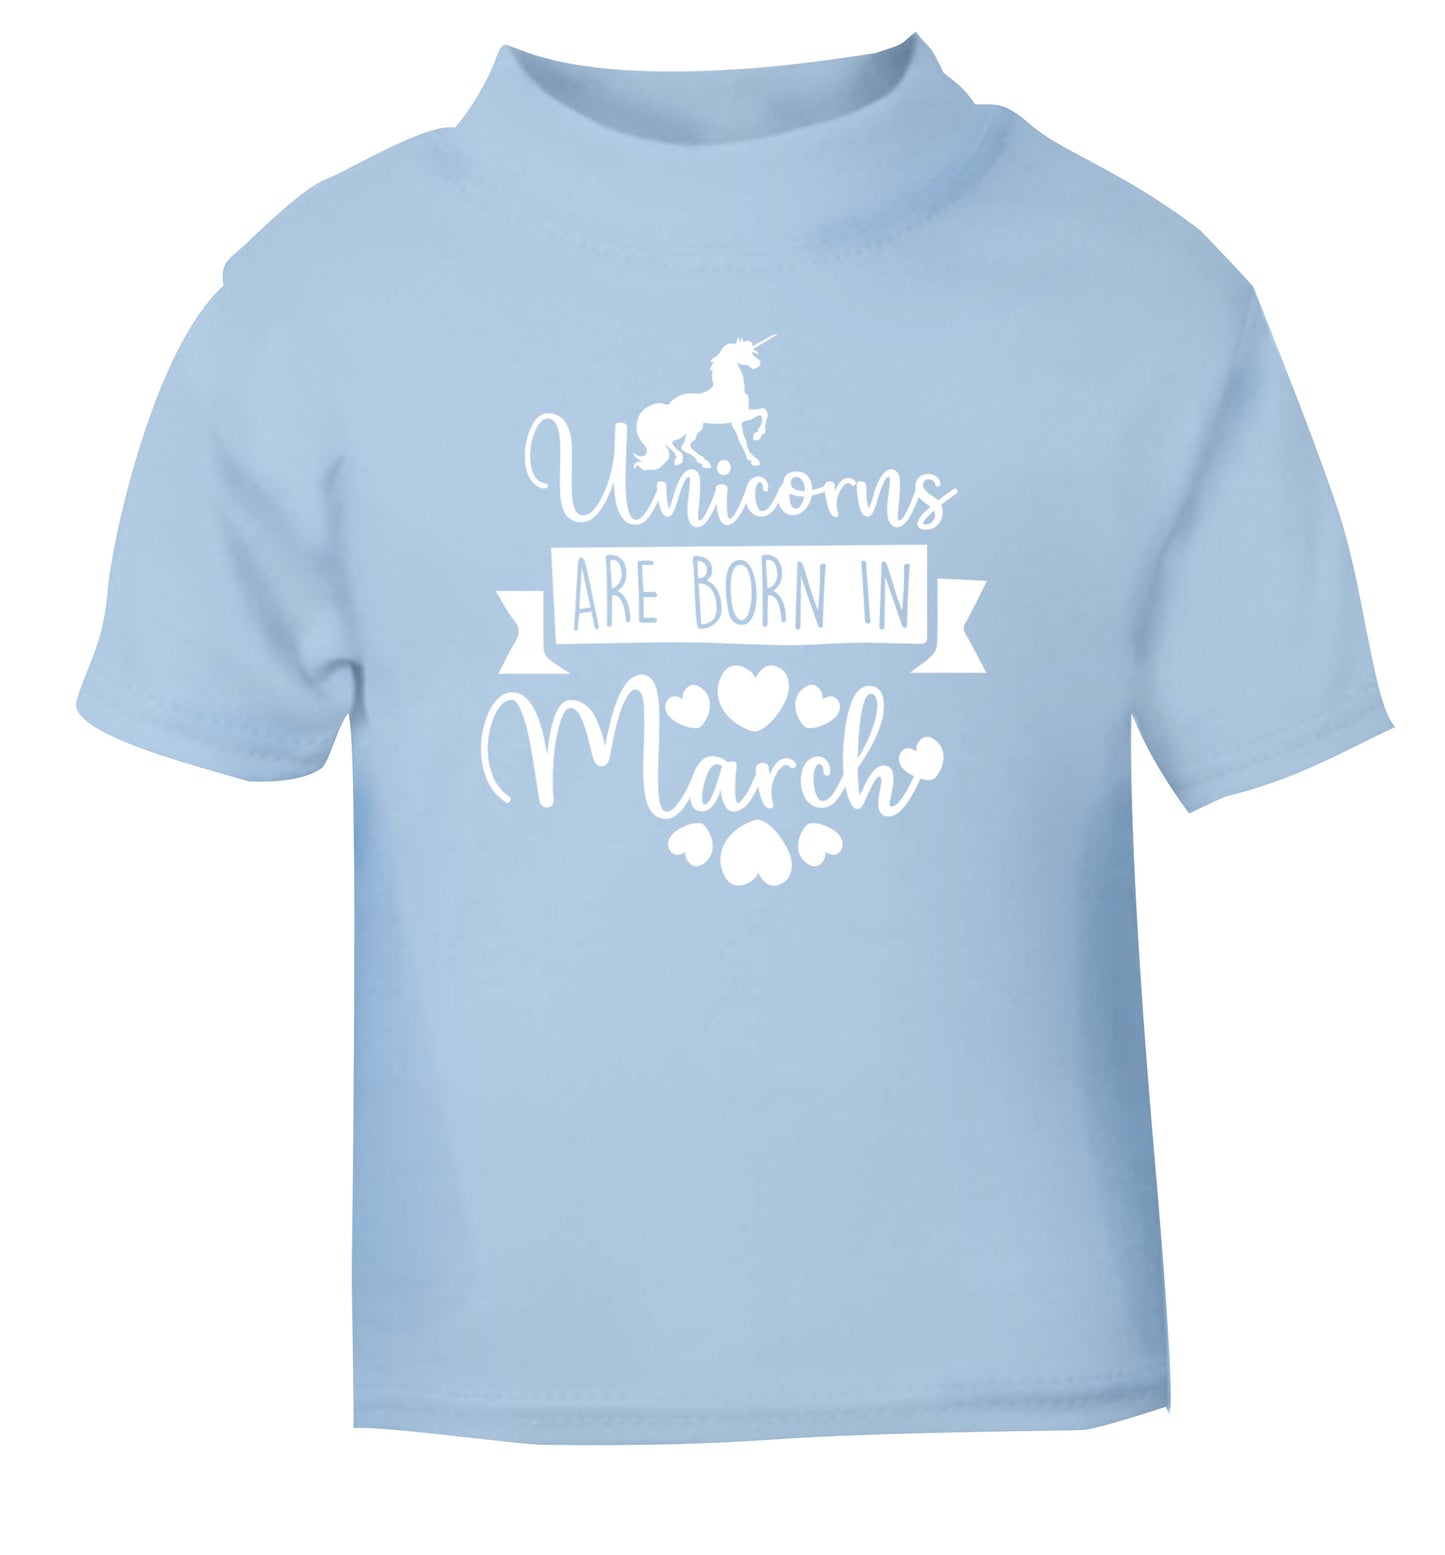 Unicorns are born in March light blue Baby Toddler Tshirt 2 Years